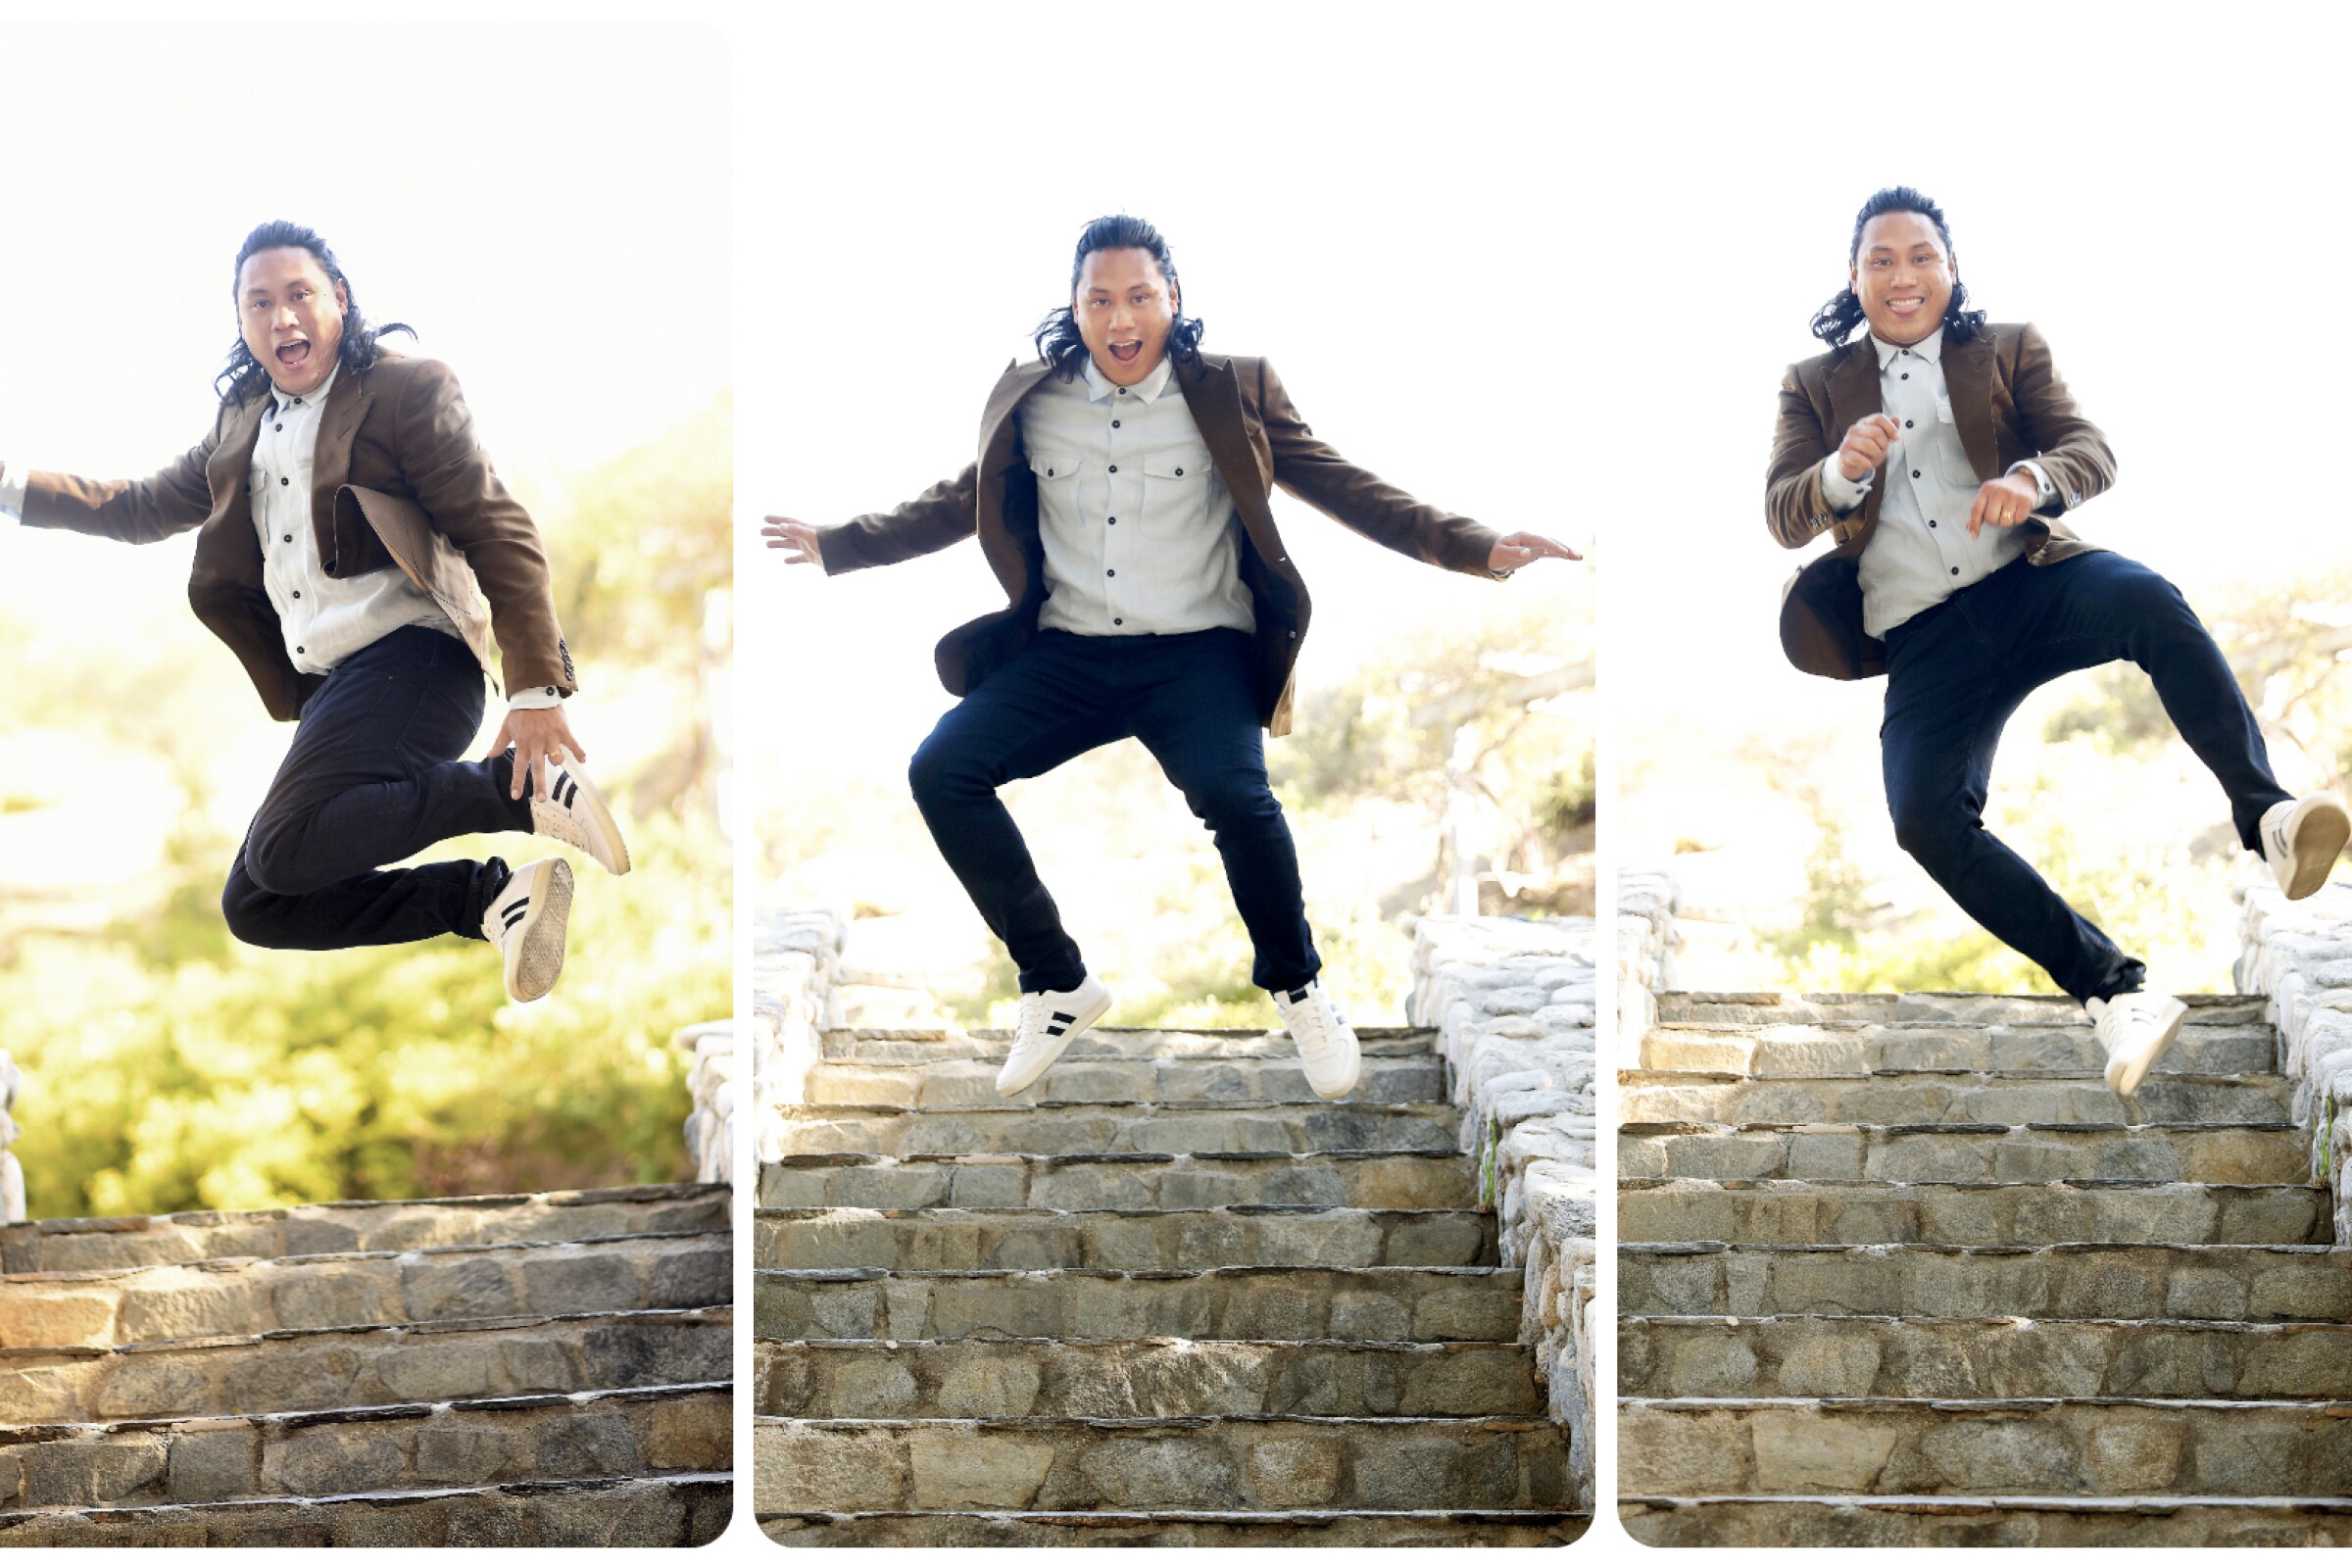 A triptych of director Jon M. Chu jumping on stone steps.